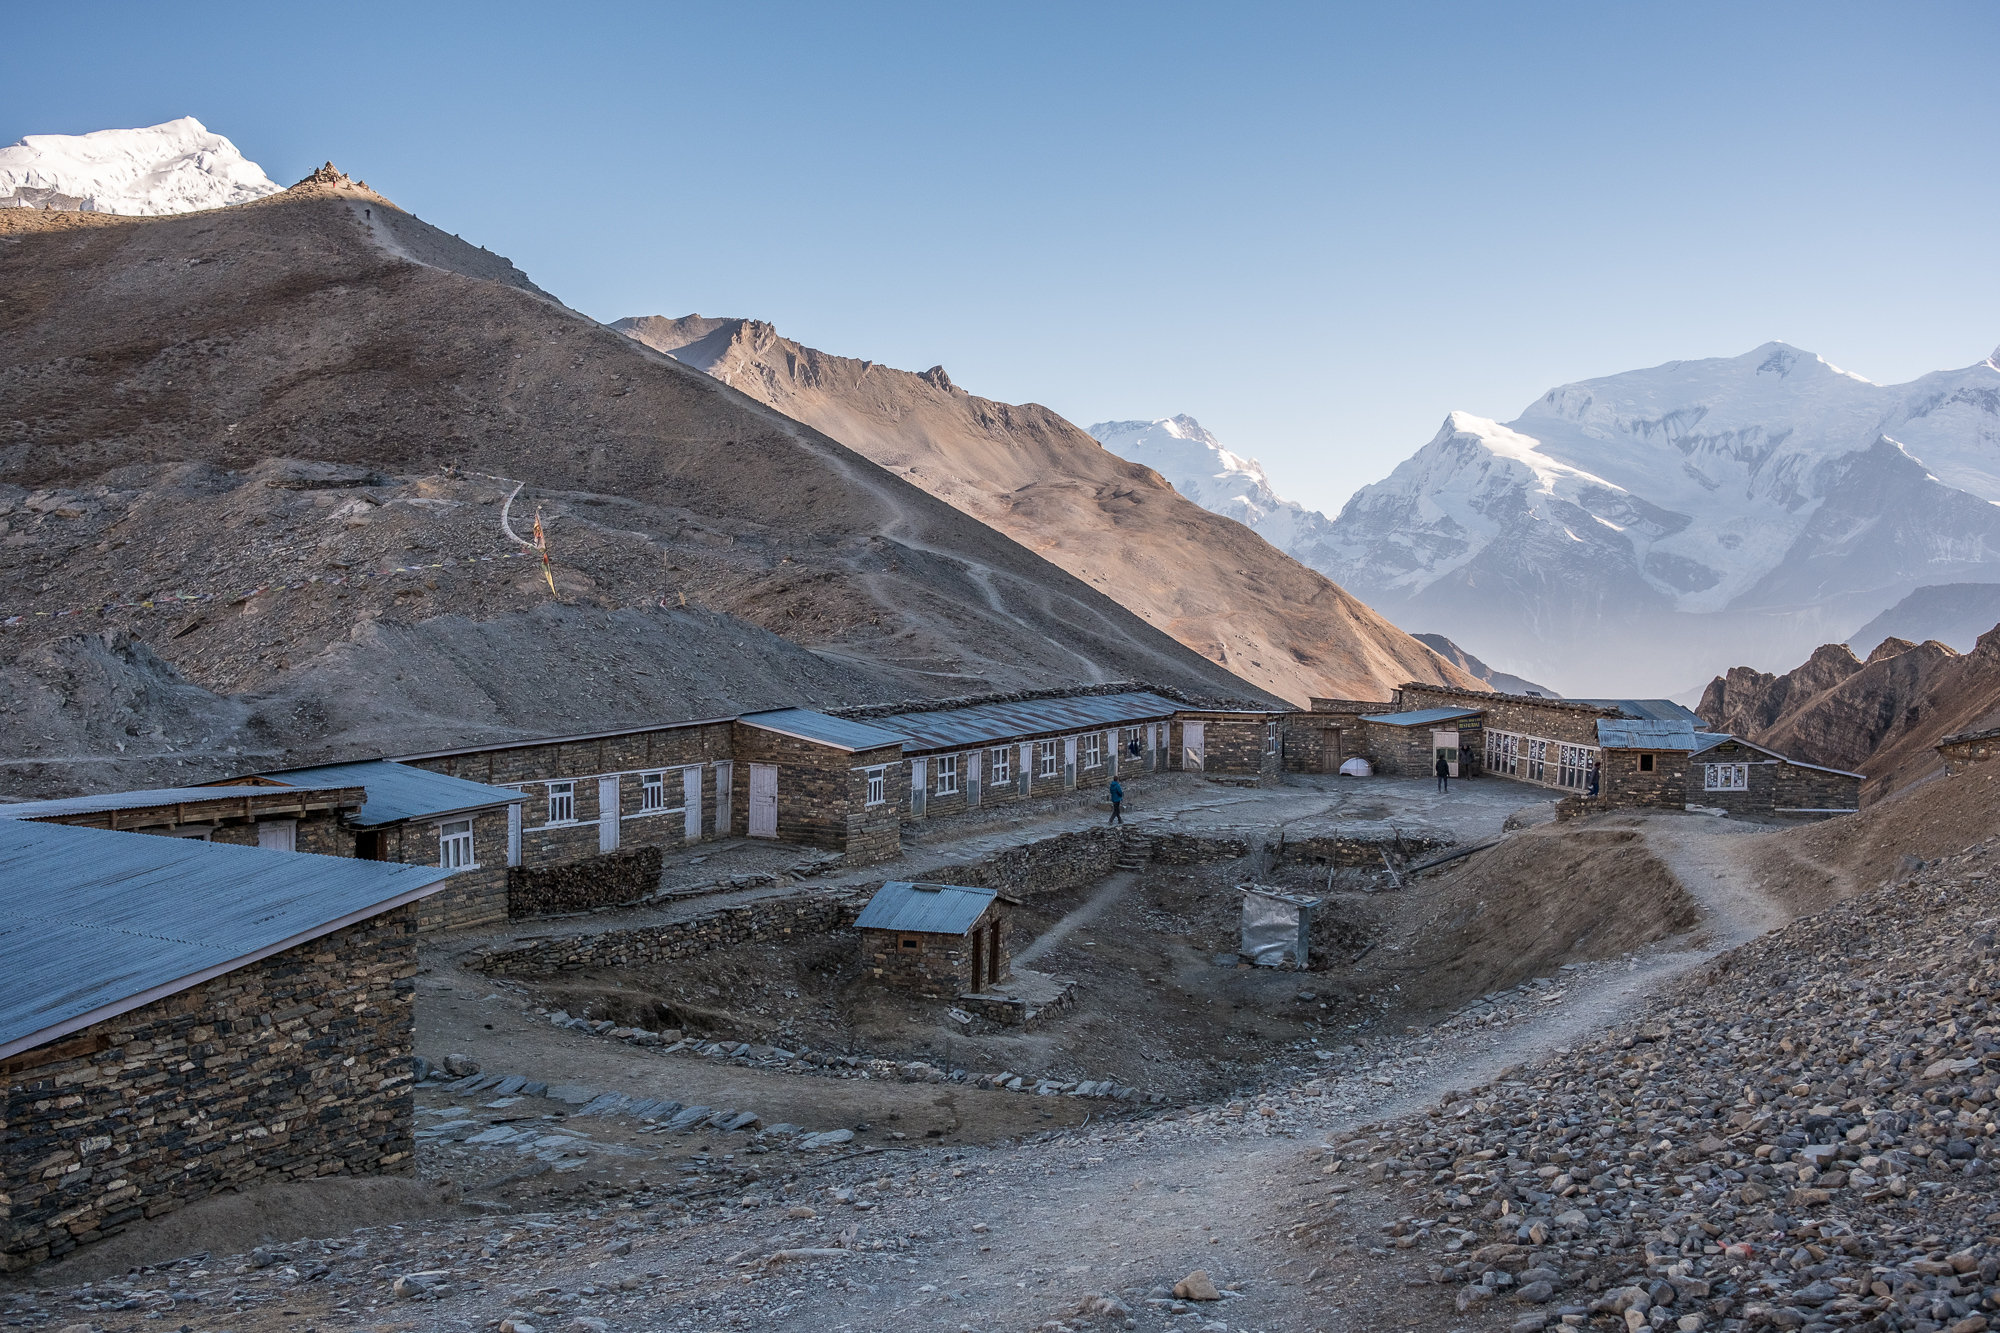 Thorung Pedi High Camp, with a view on shared rooms (with two beds) and restrooms. The last building is the main area with the kitchen. Don’t forget your down jacket(s), even inside.